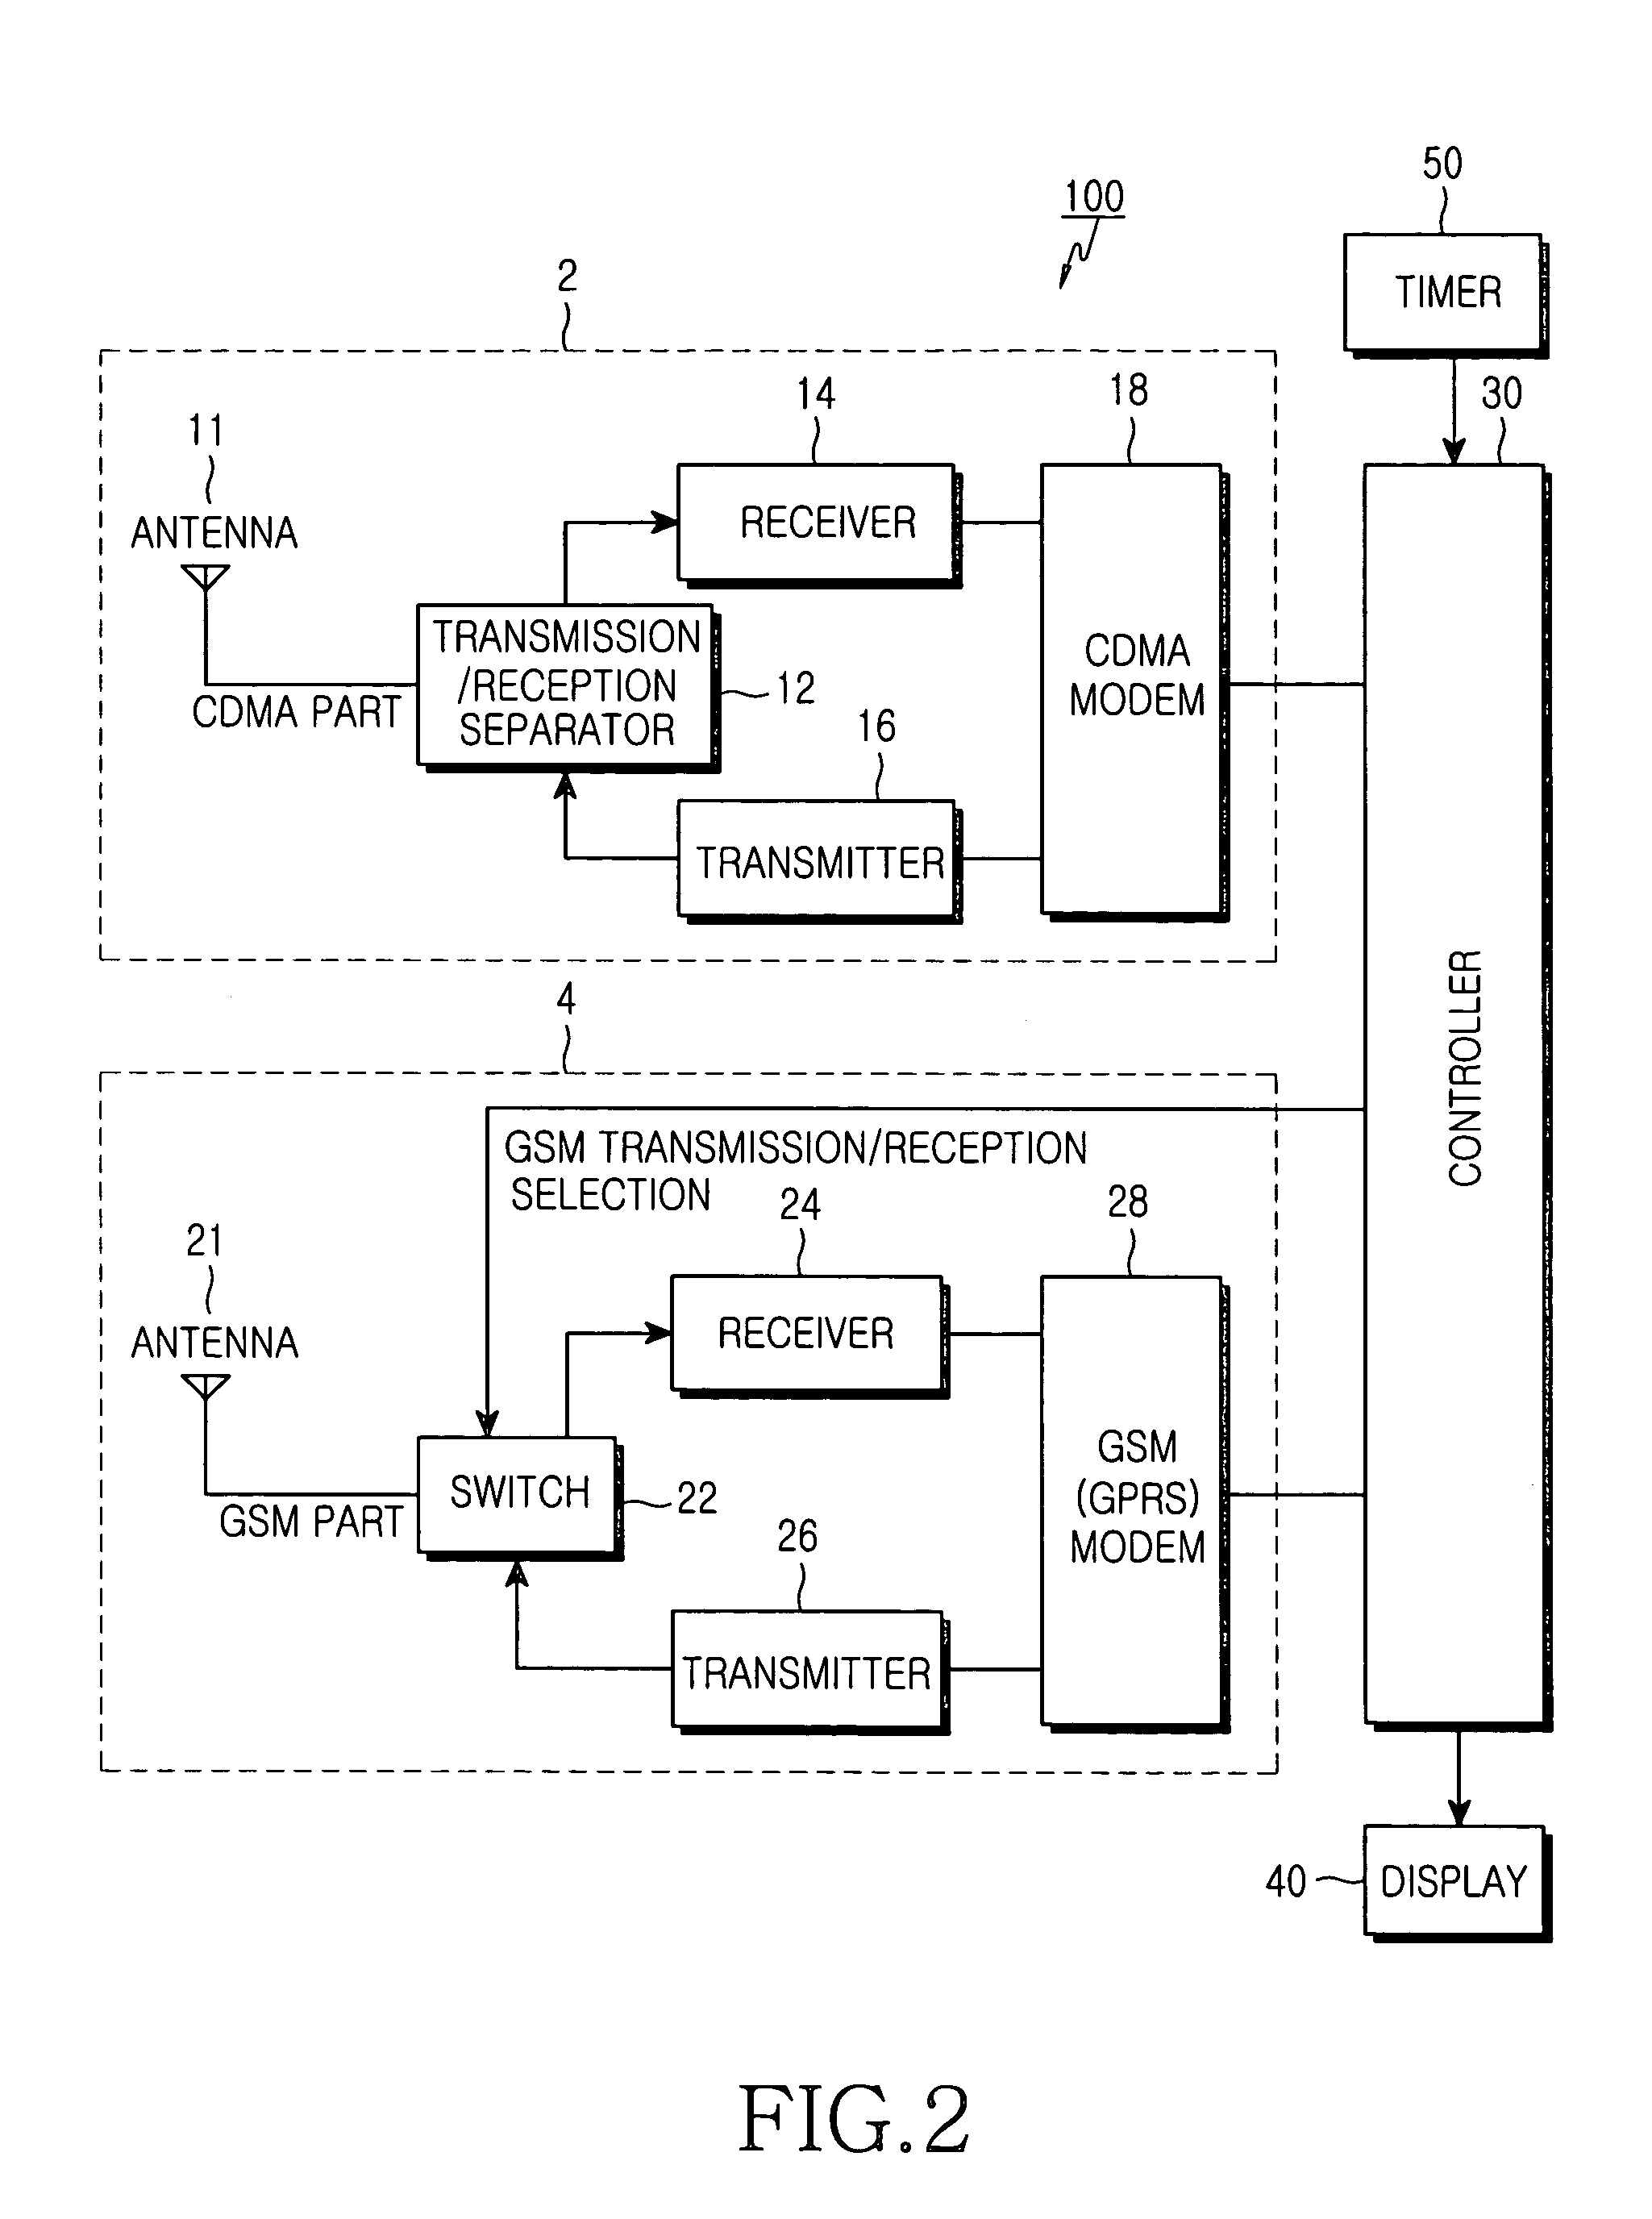 Dual-mode mobile terminal and method for displaying time information